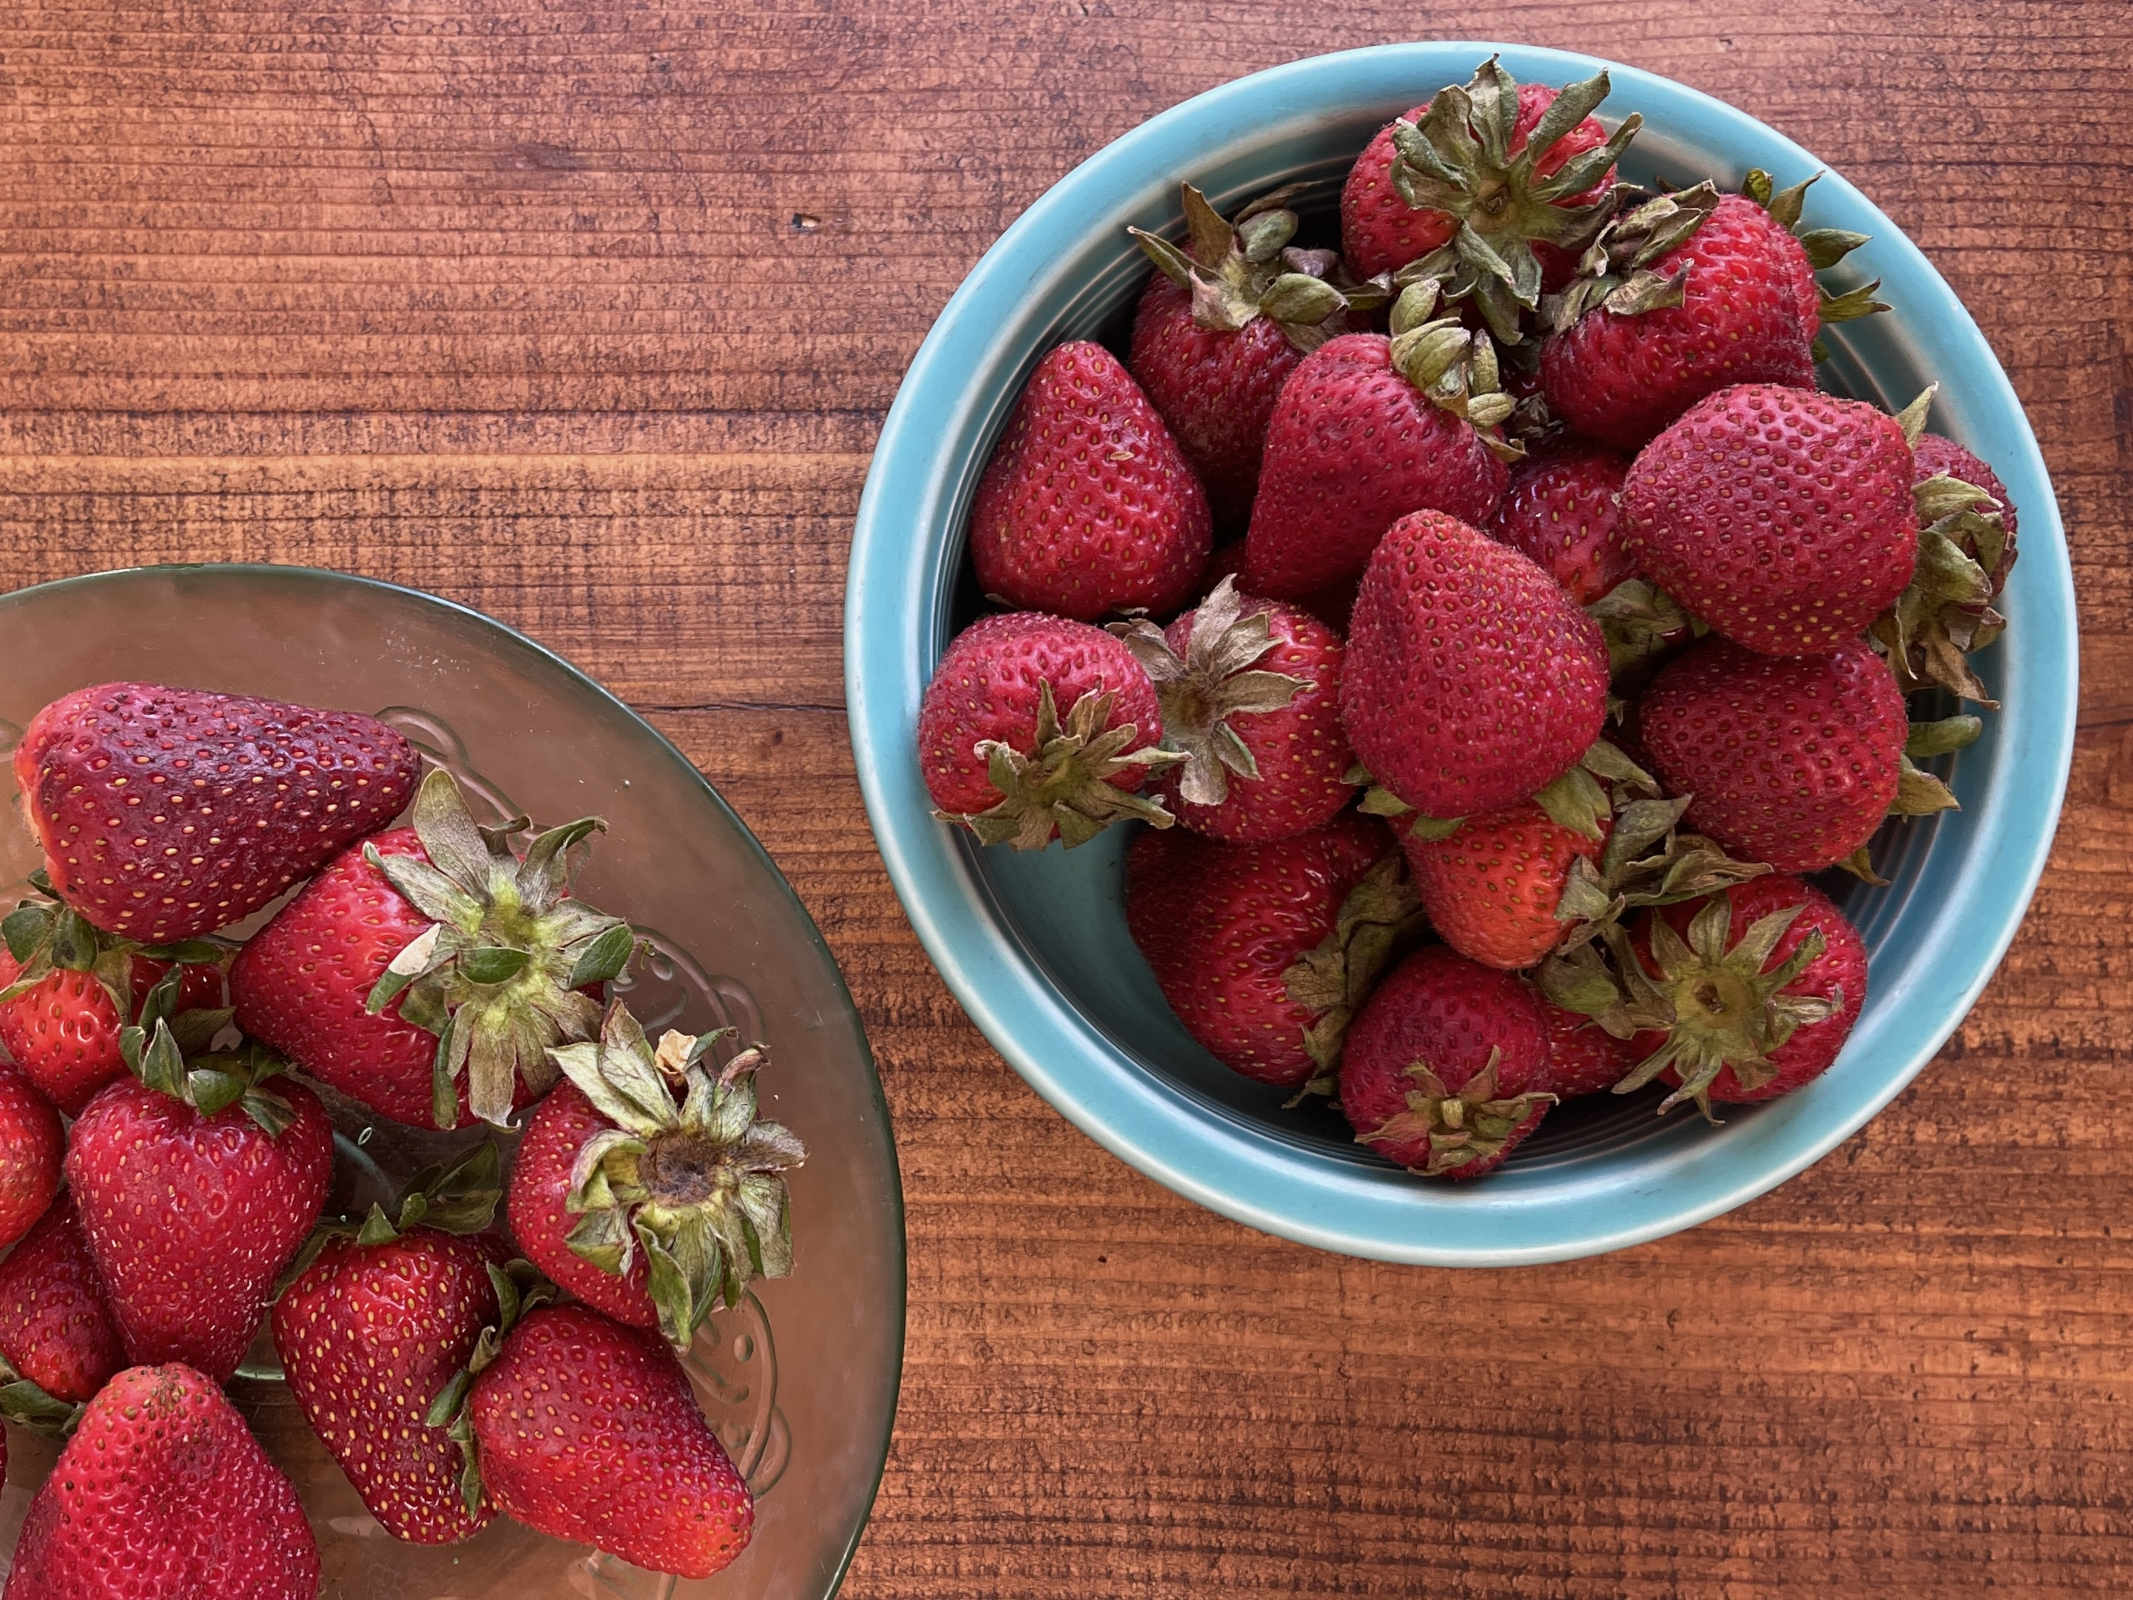 Two bowls of strawberries sit on a wooden table. They are past their peak but still edible.